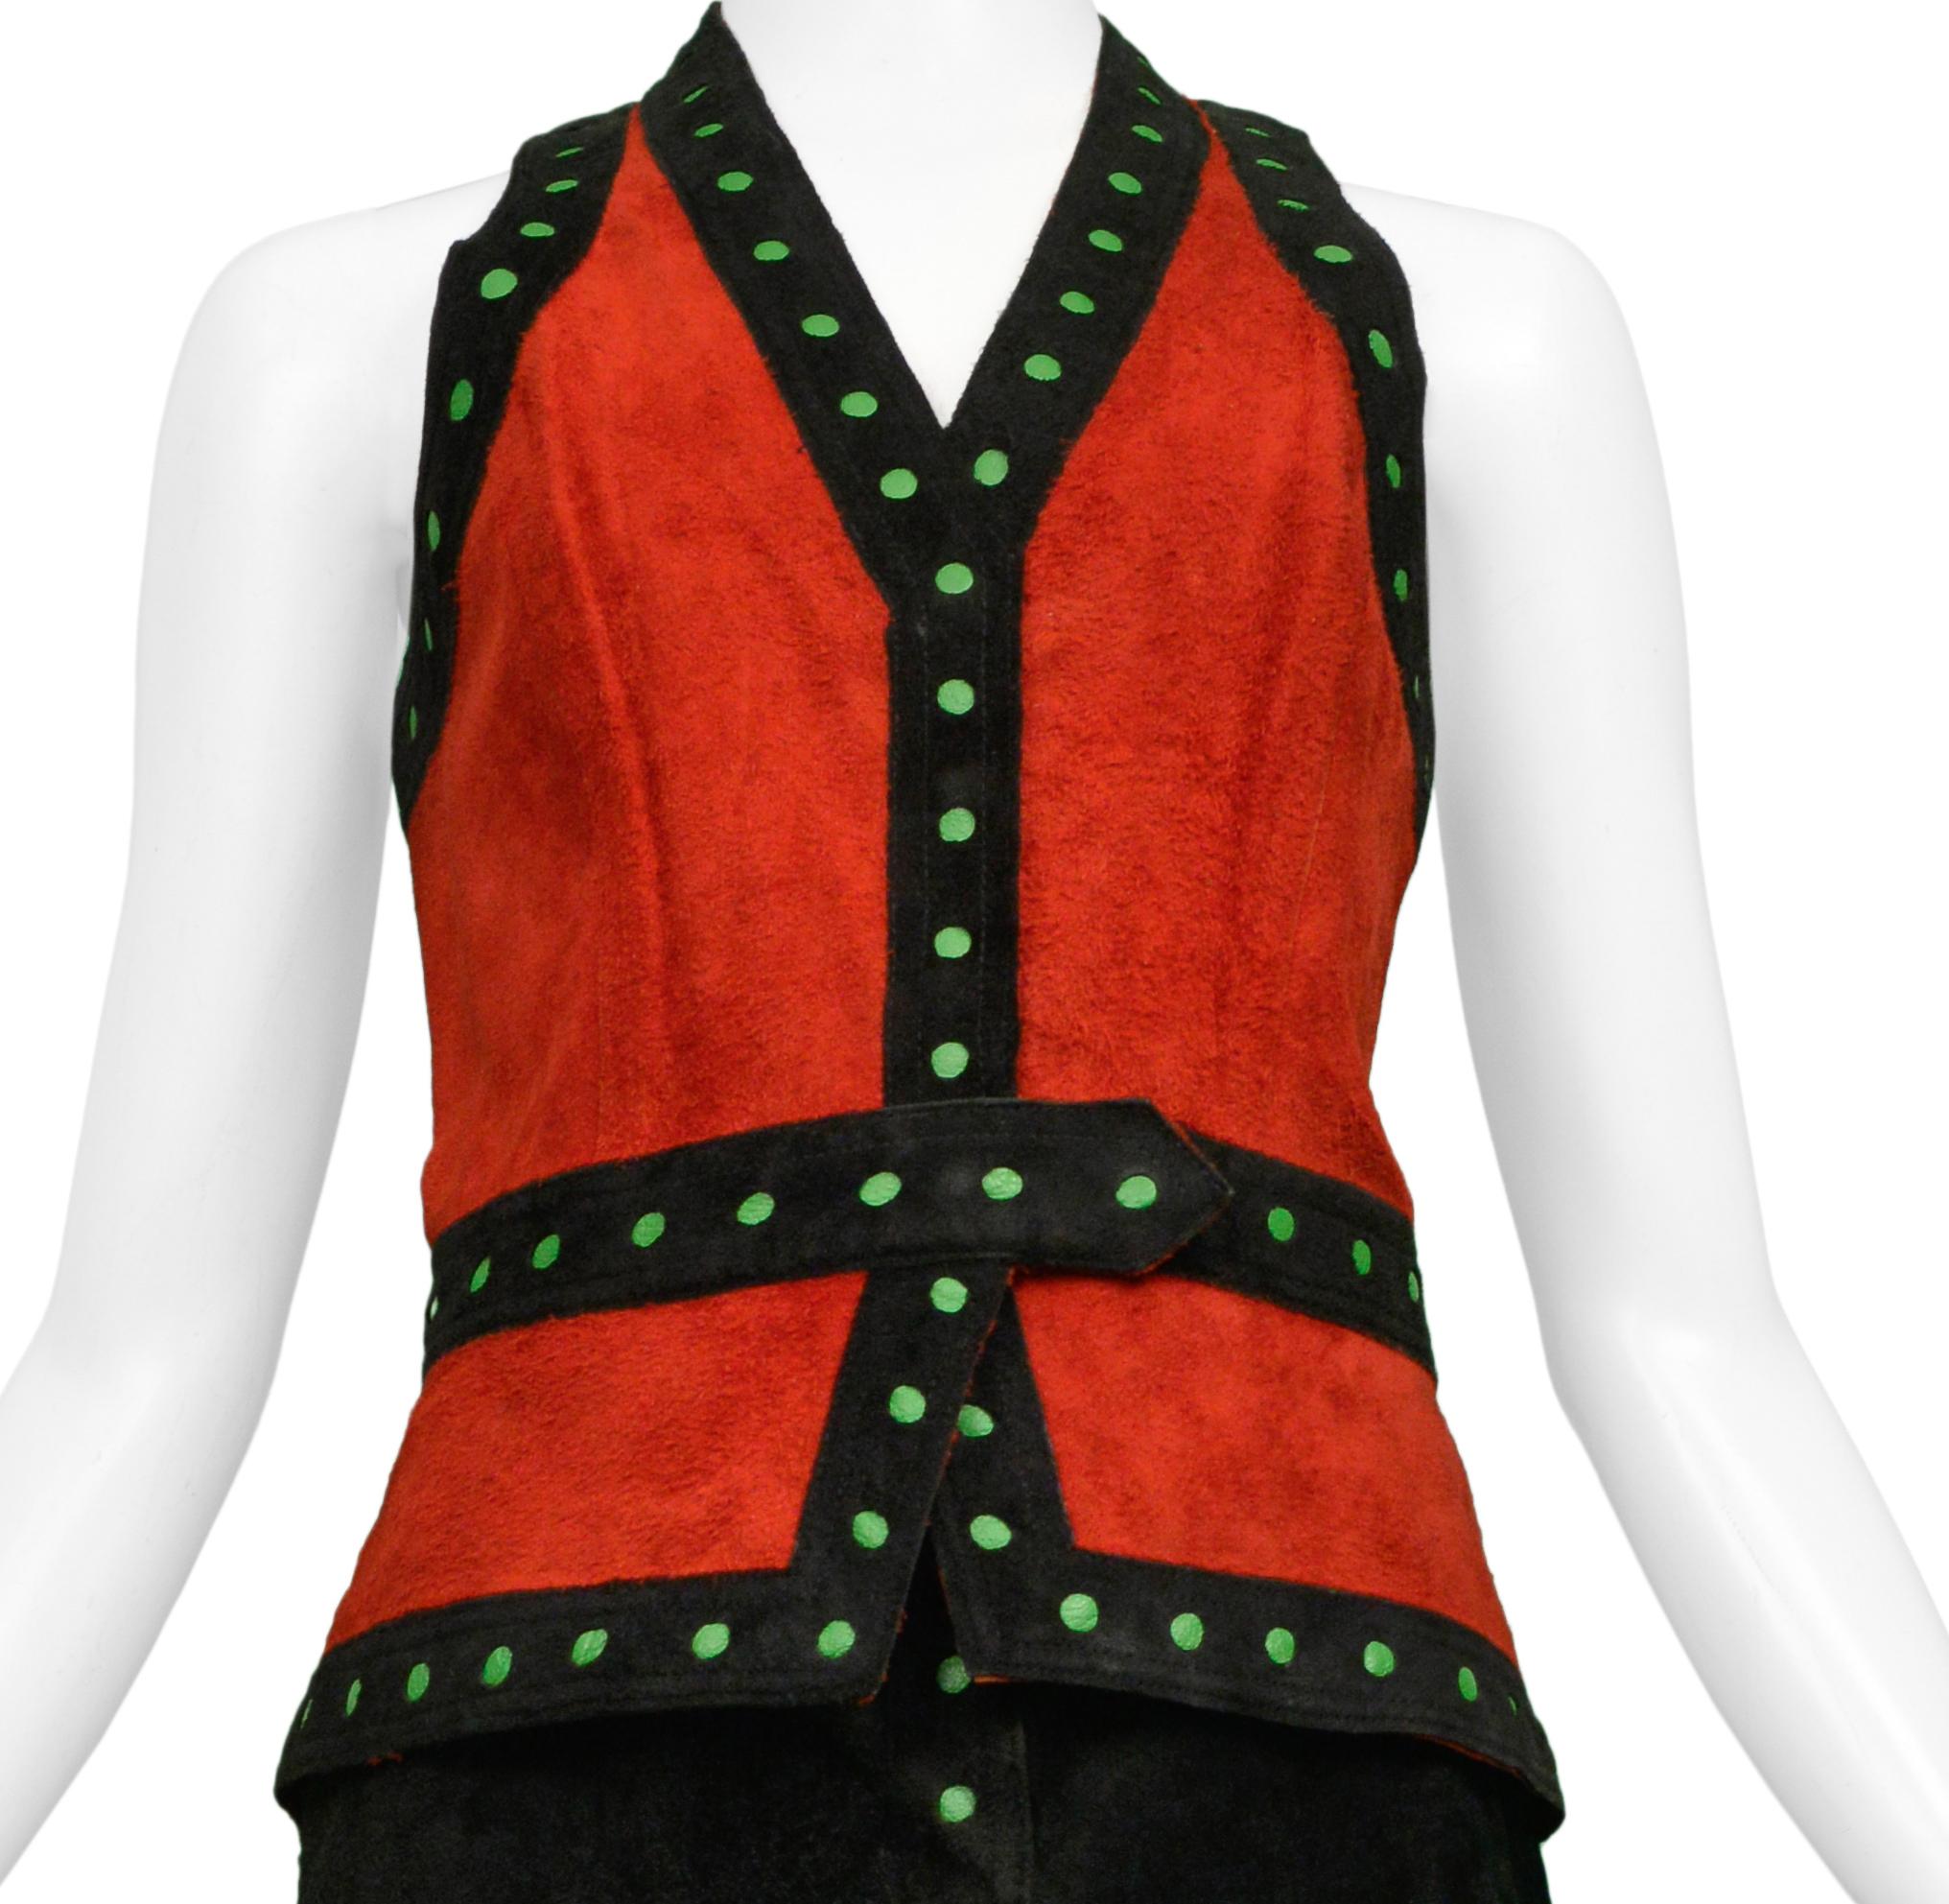 Resurrection Vintage is excited to offer a vintage black and red Giorgio Sant Angelo suede vest and skirt ensemble featuring a red vest with black and green dot trim, and a black suede wrap maxi skirt with matching black and green dot trim.

Giorgio